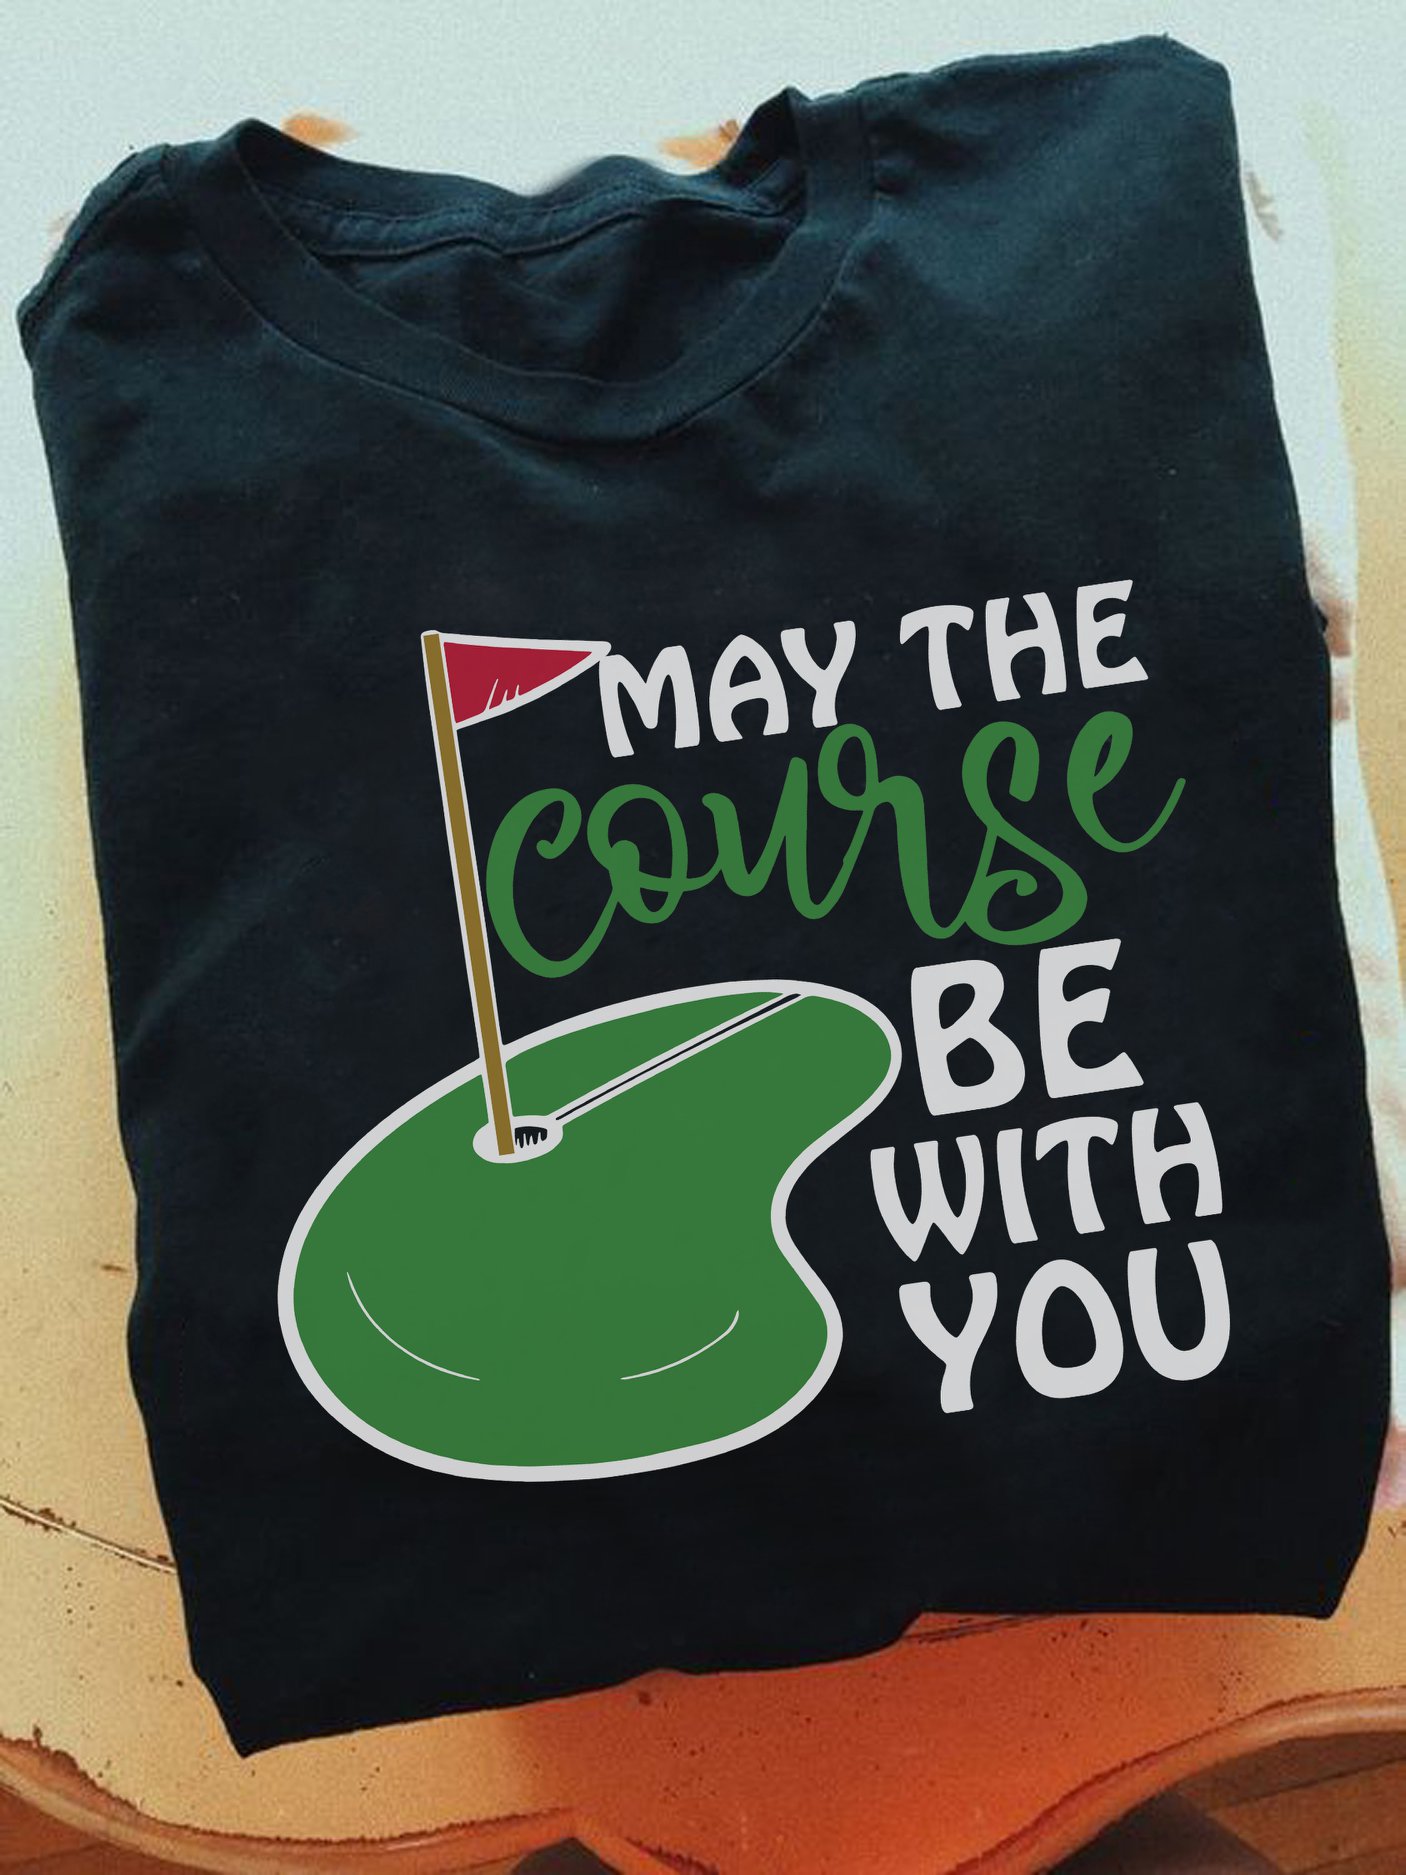 May the course be with you - Golf lover, the golfer